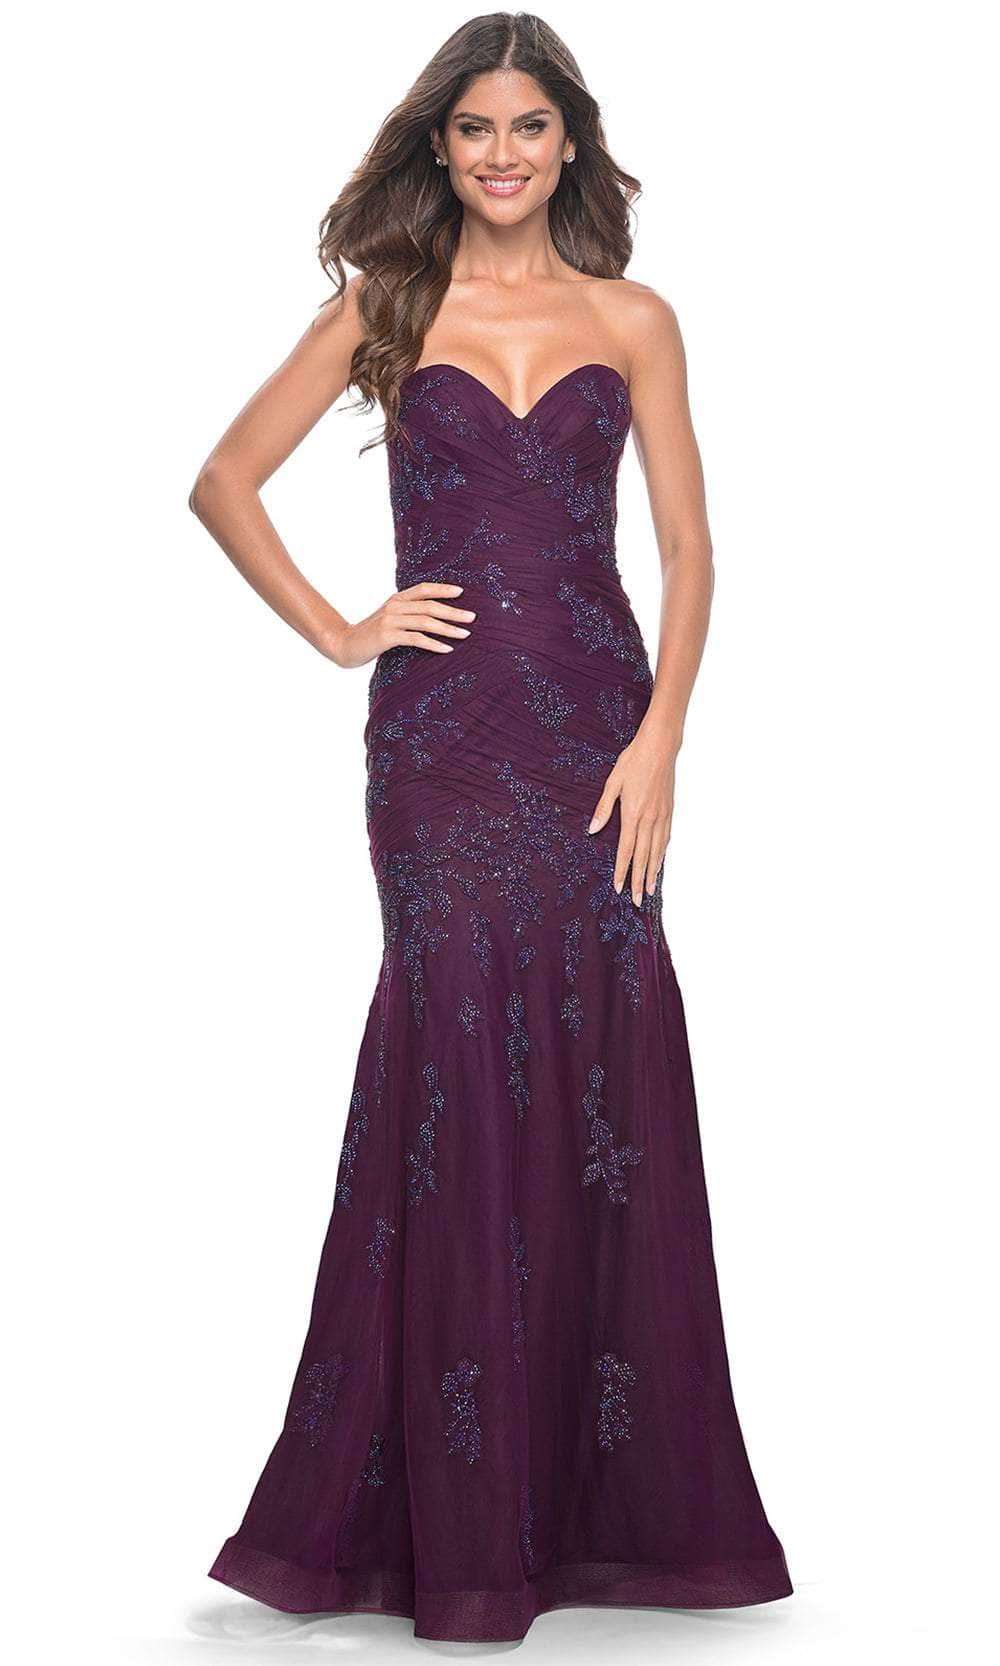 Image of La Femme 32121 - Beaded Applique Strapless Prom Gown